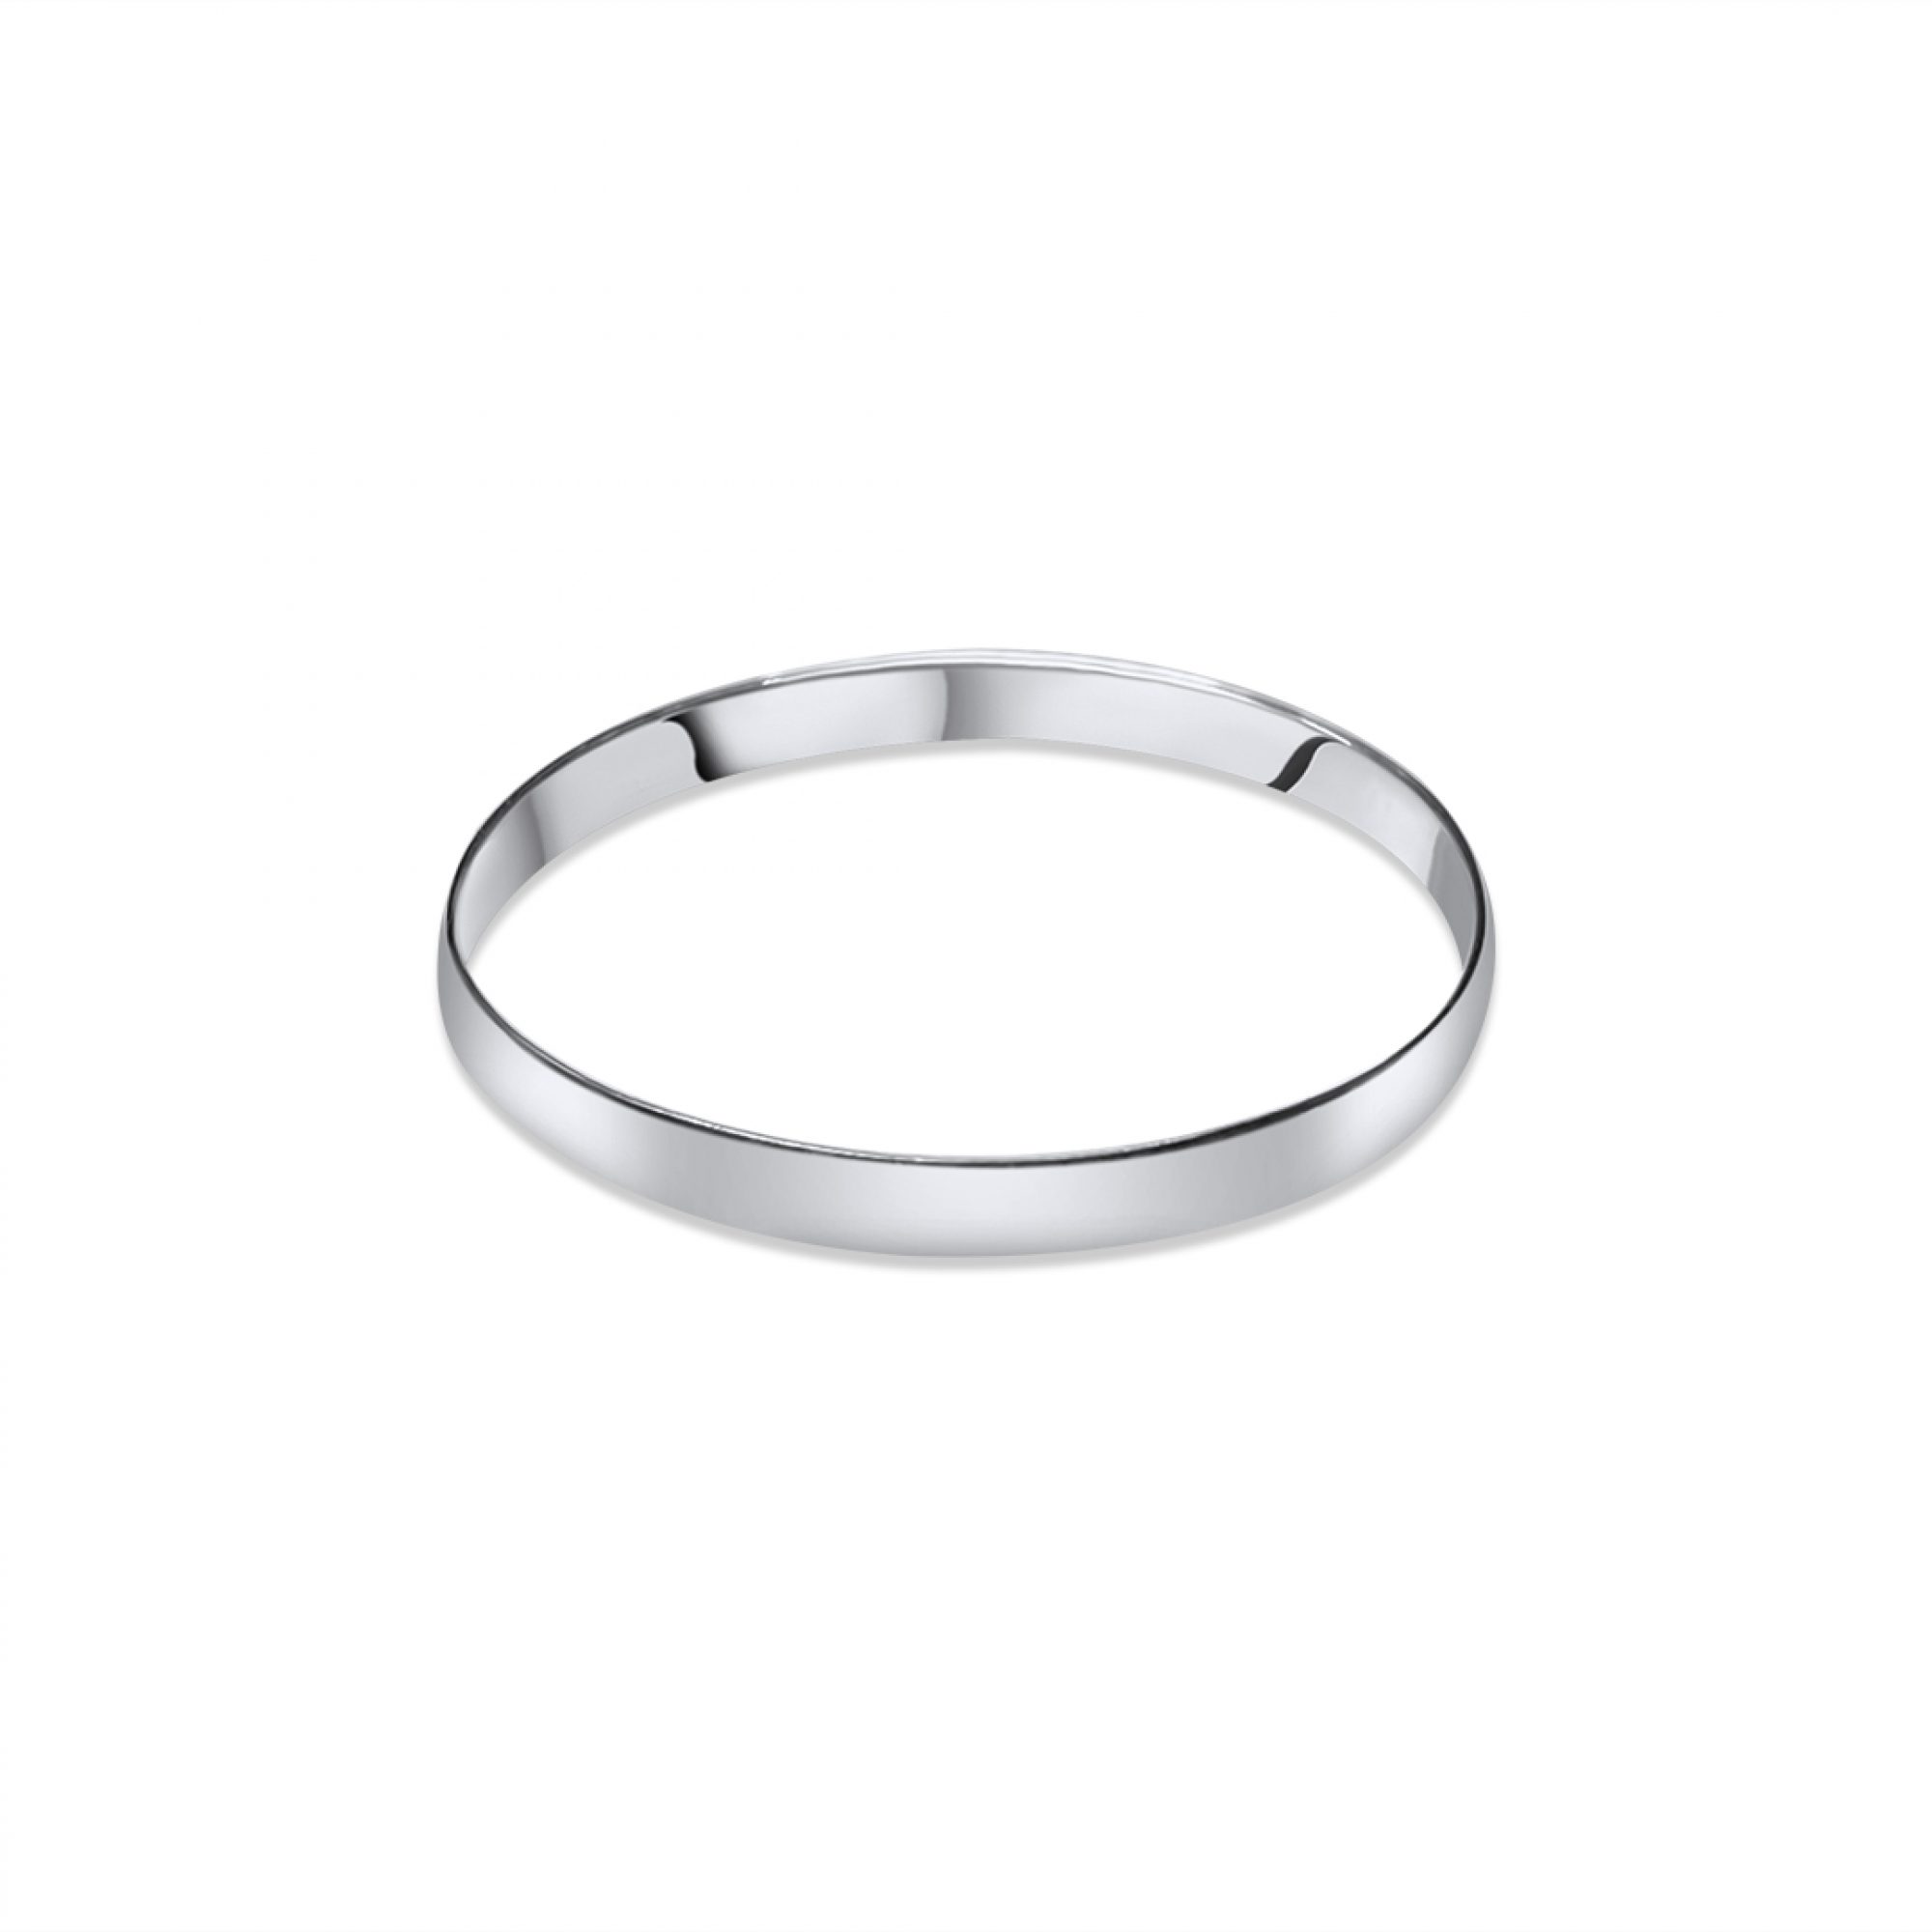 Silver band ring 2mm